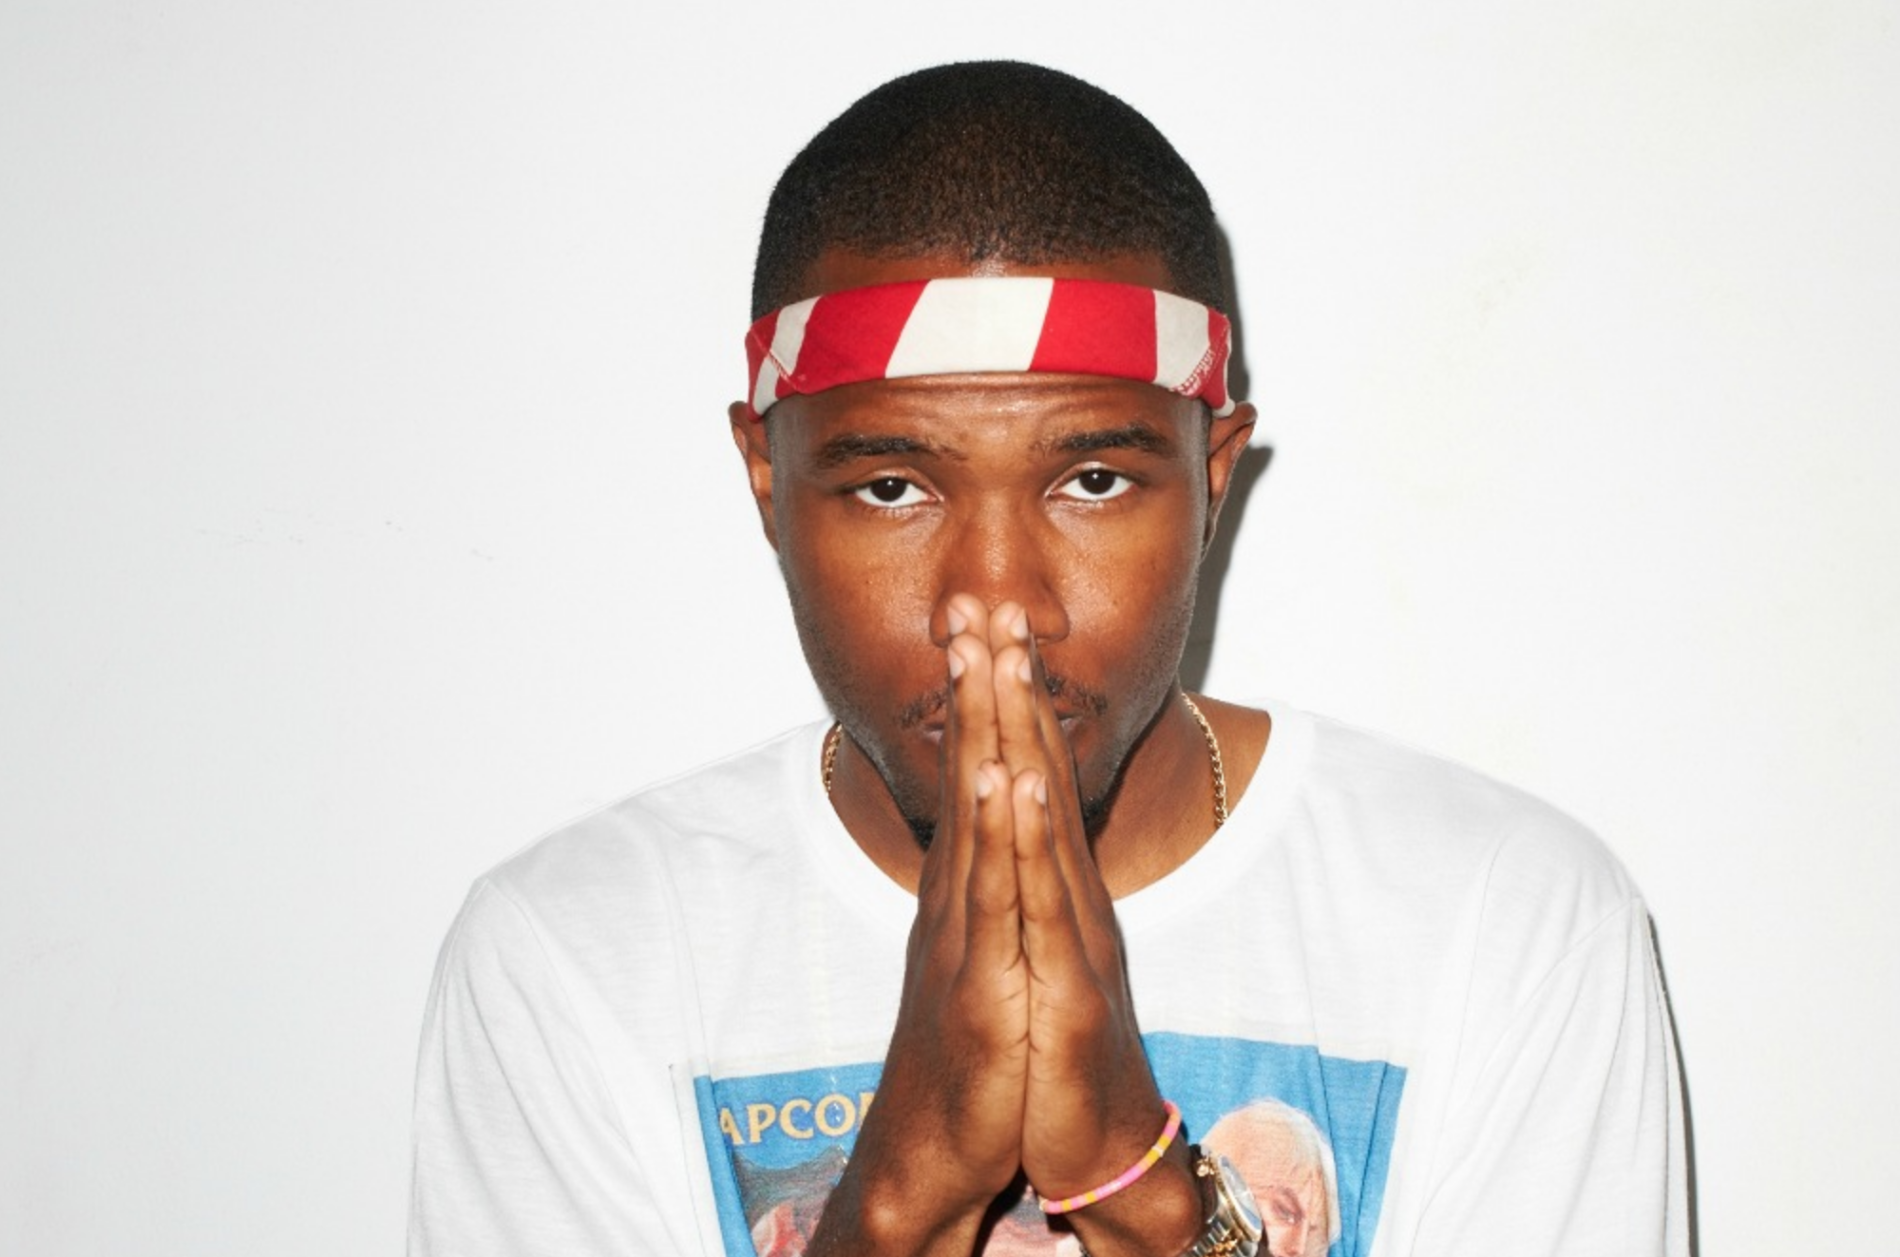 Frank Ocean Shares Moving Essay About Homophobia and the Orlando Tragedy